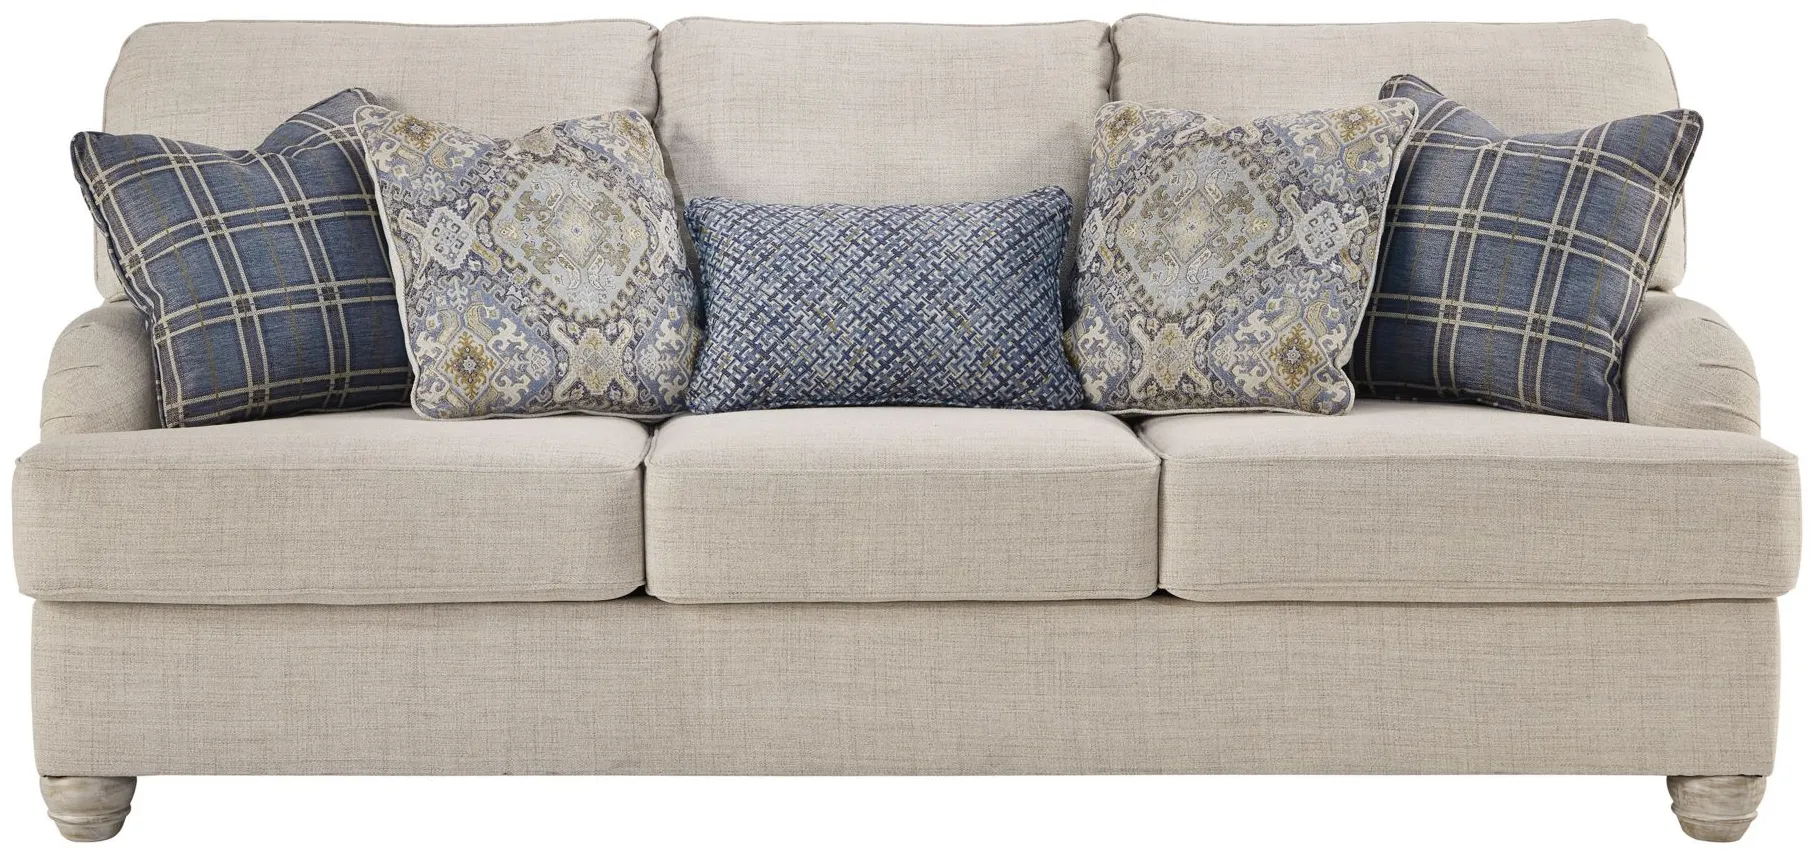 Trixie Sofa in Linen by Ashley Furniture